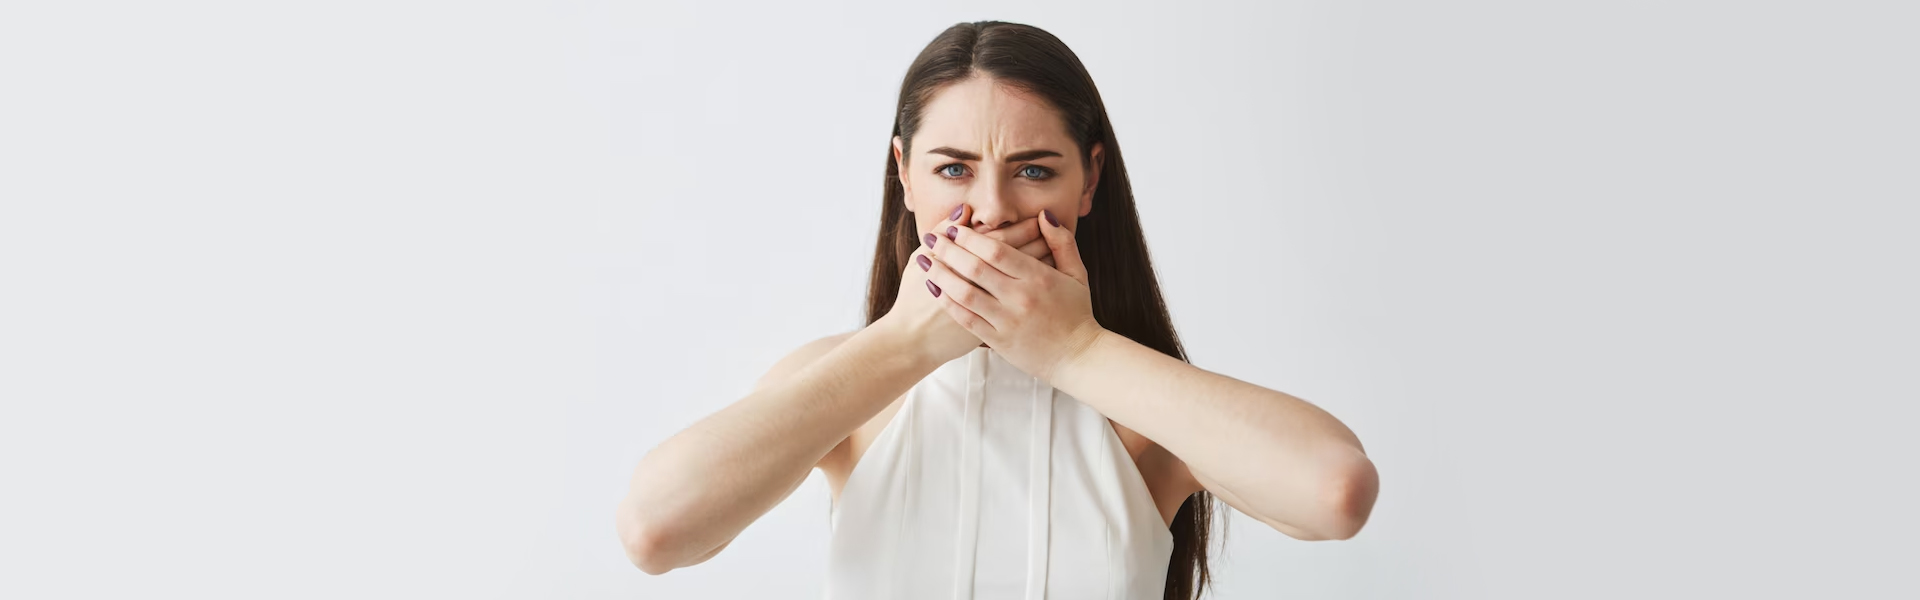 Prevent Bad Breath: The Best Tips for Eliminating Halitosis